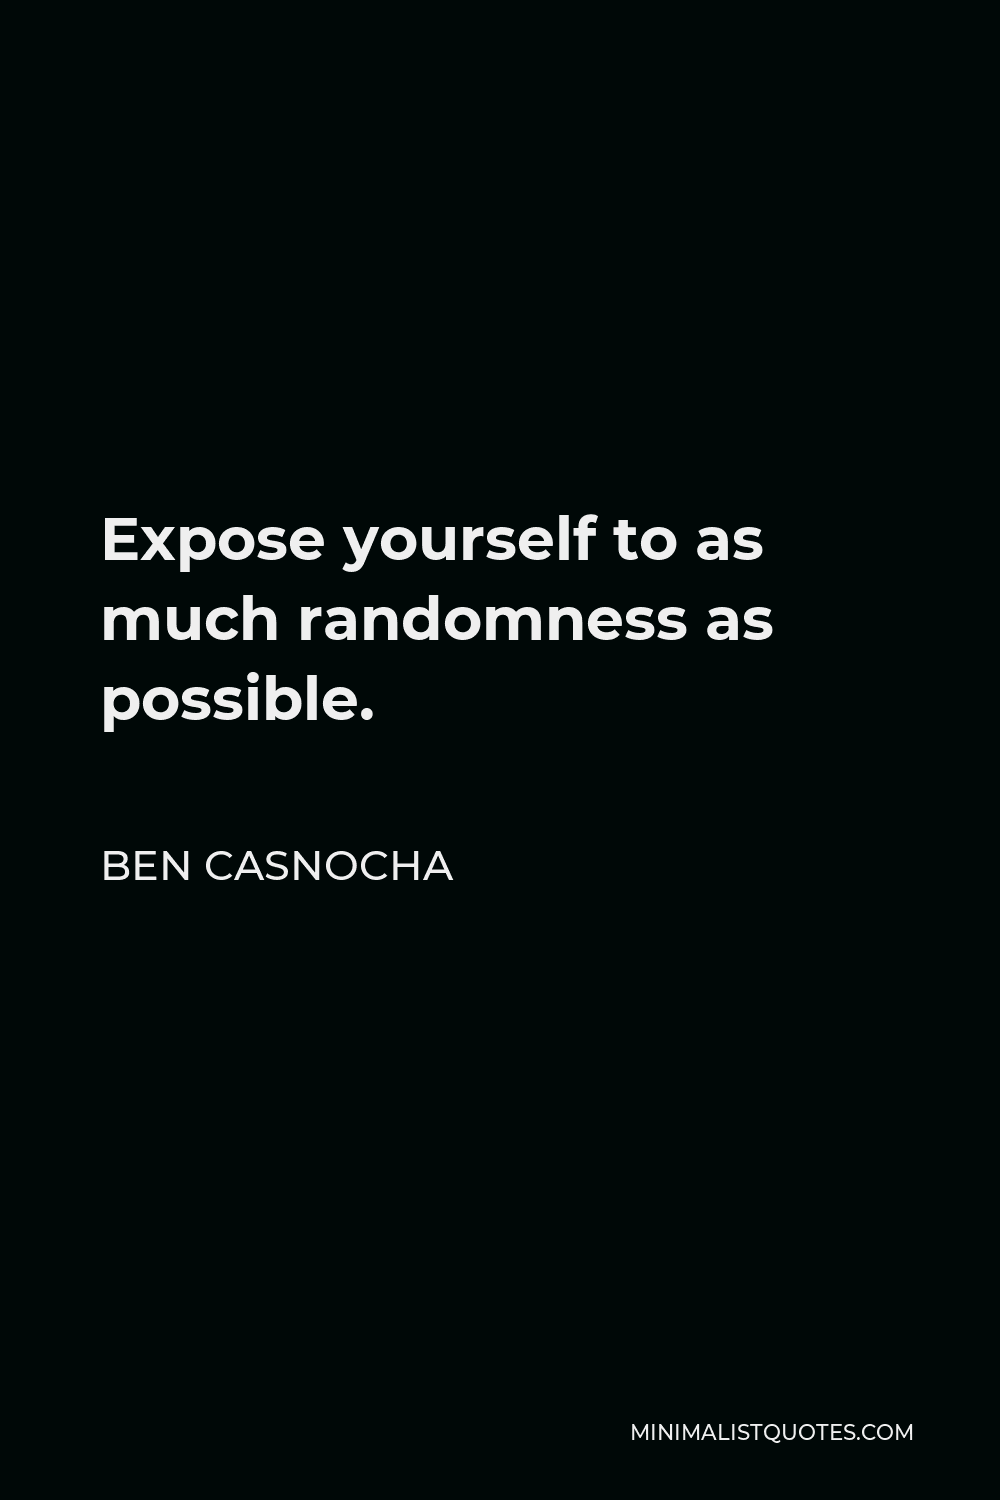 Ben Casnocha Quote - Expose yourself to as much randomness as possible.